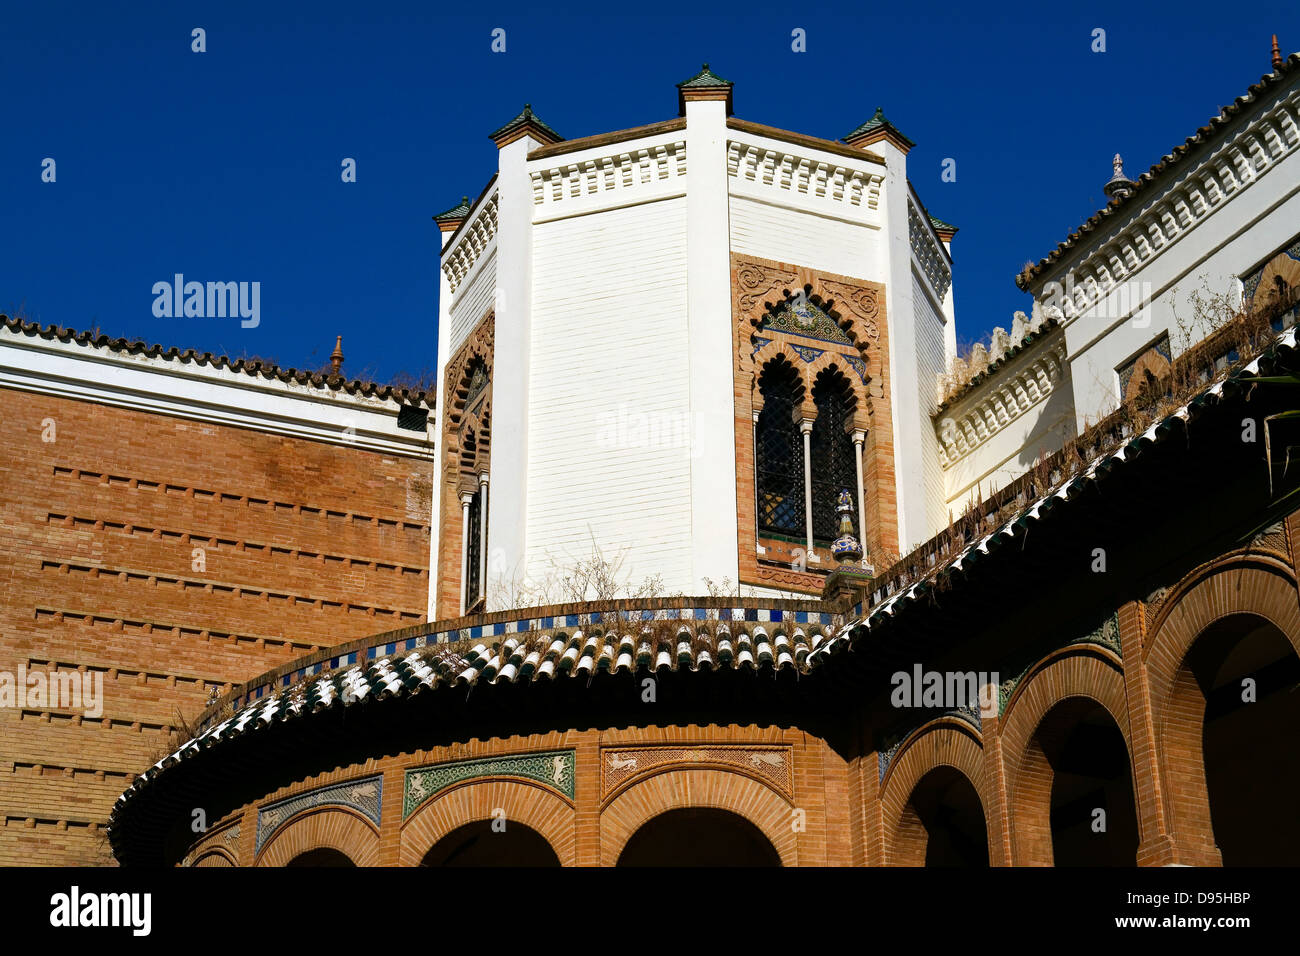 Museo de Artes y Costumbres Populares - Museum of Adalusian Folk arts in Maria Luisa Park, Seville, Andalusia, Spain Stock Photo